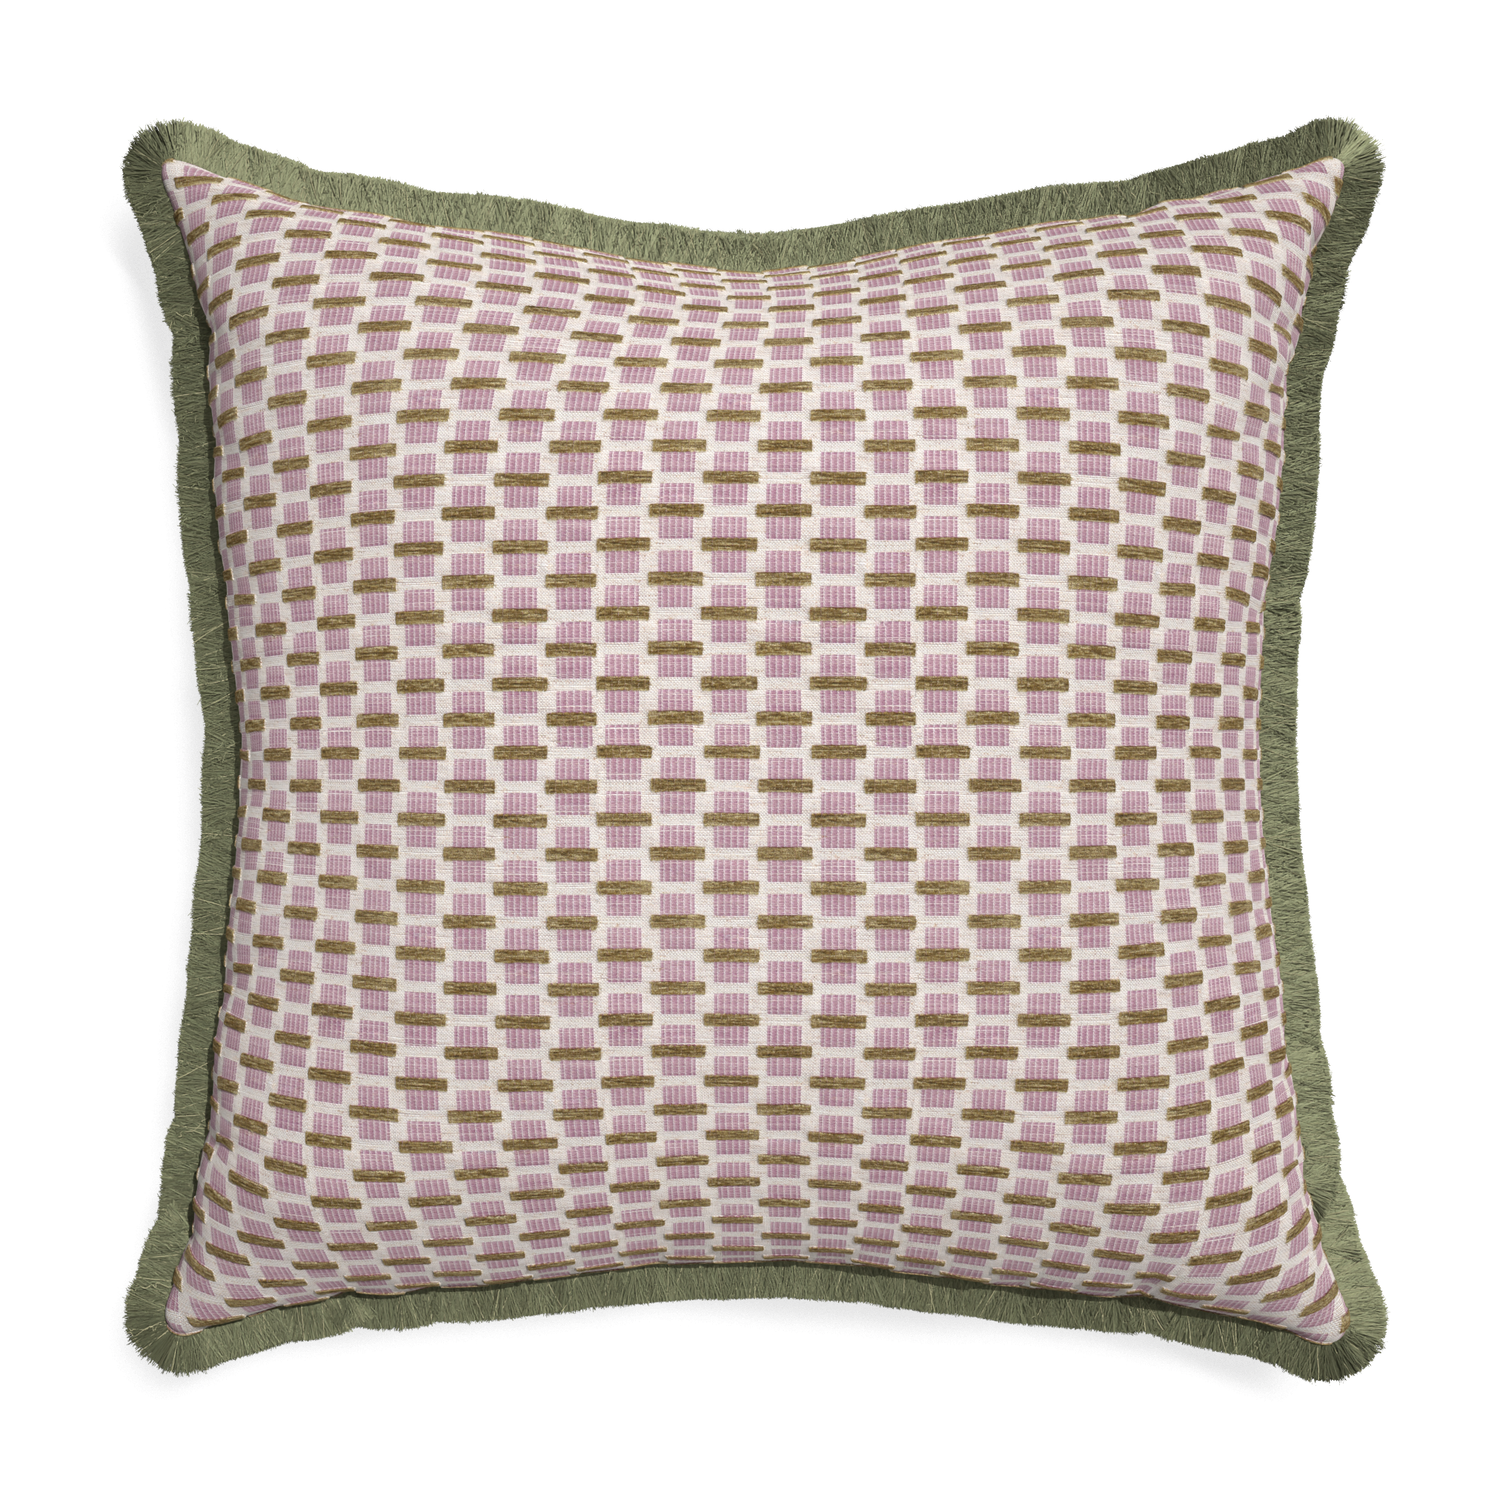 Euro-sham willow orchid custom pink geometric chenillepillow with sage fringe on white background